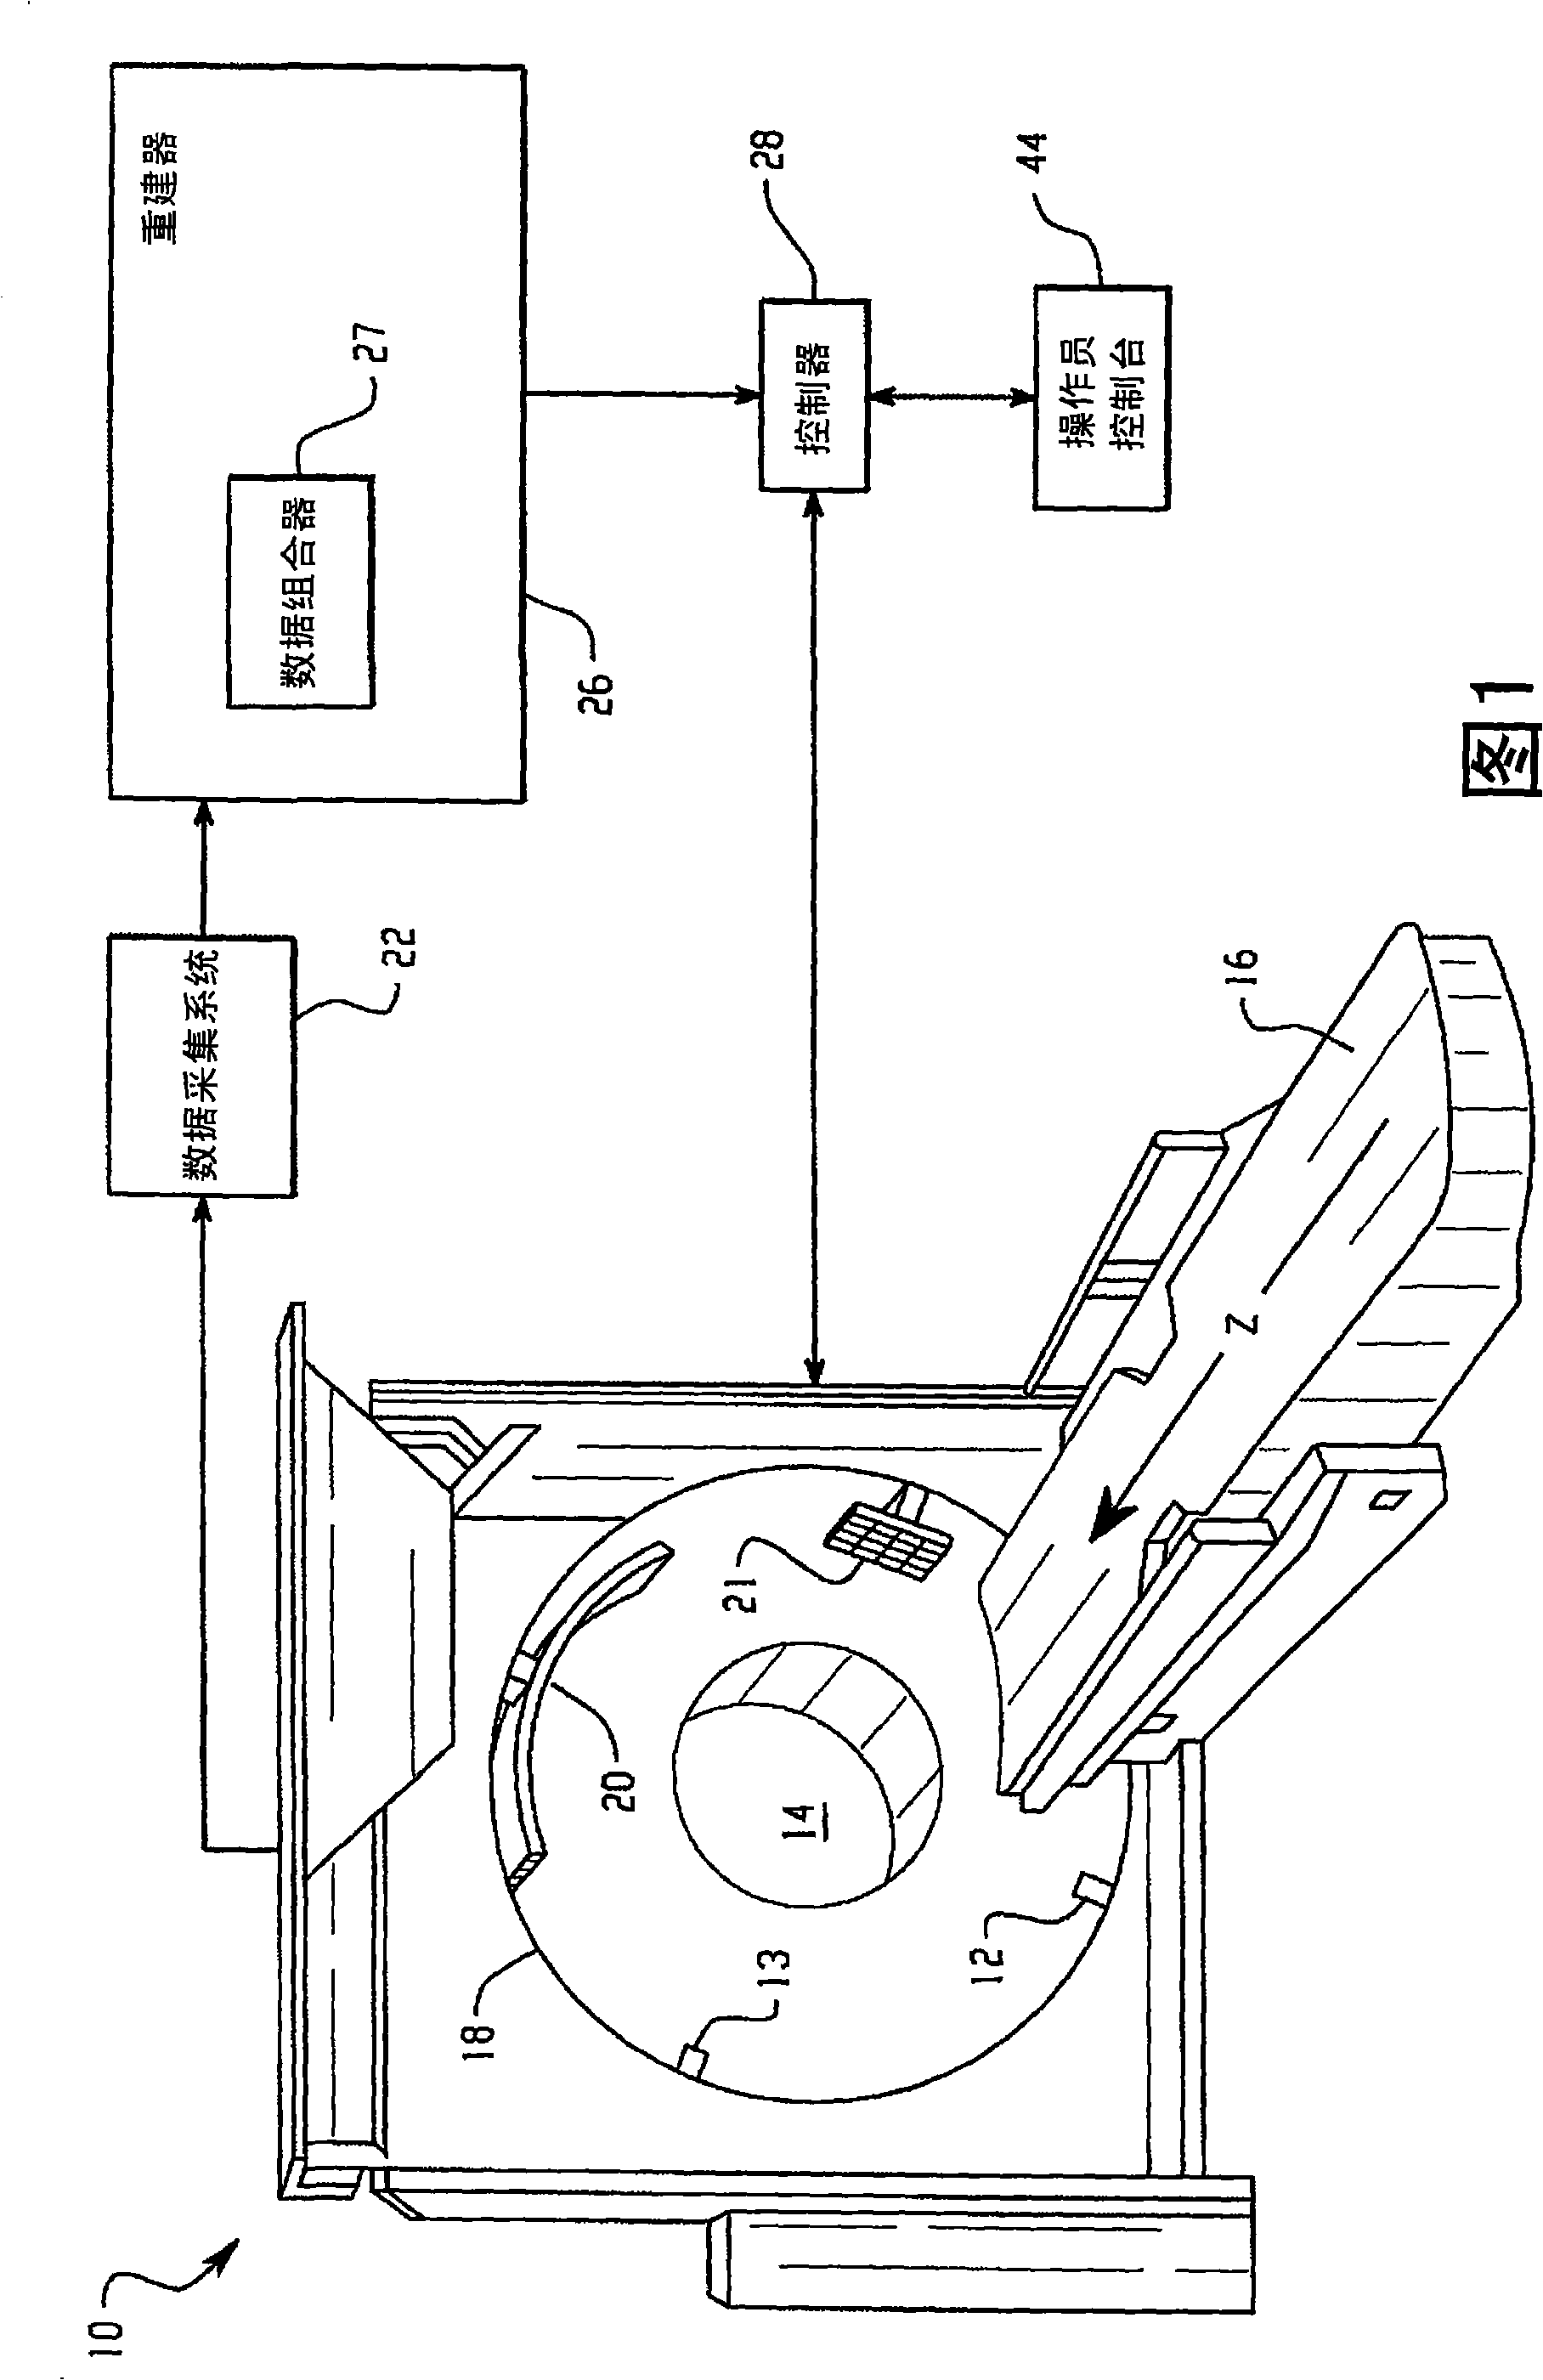 Computed tomography data acquisition apparatus and method